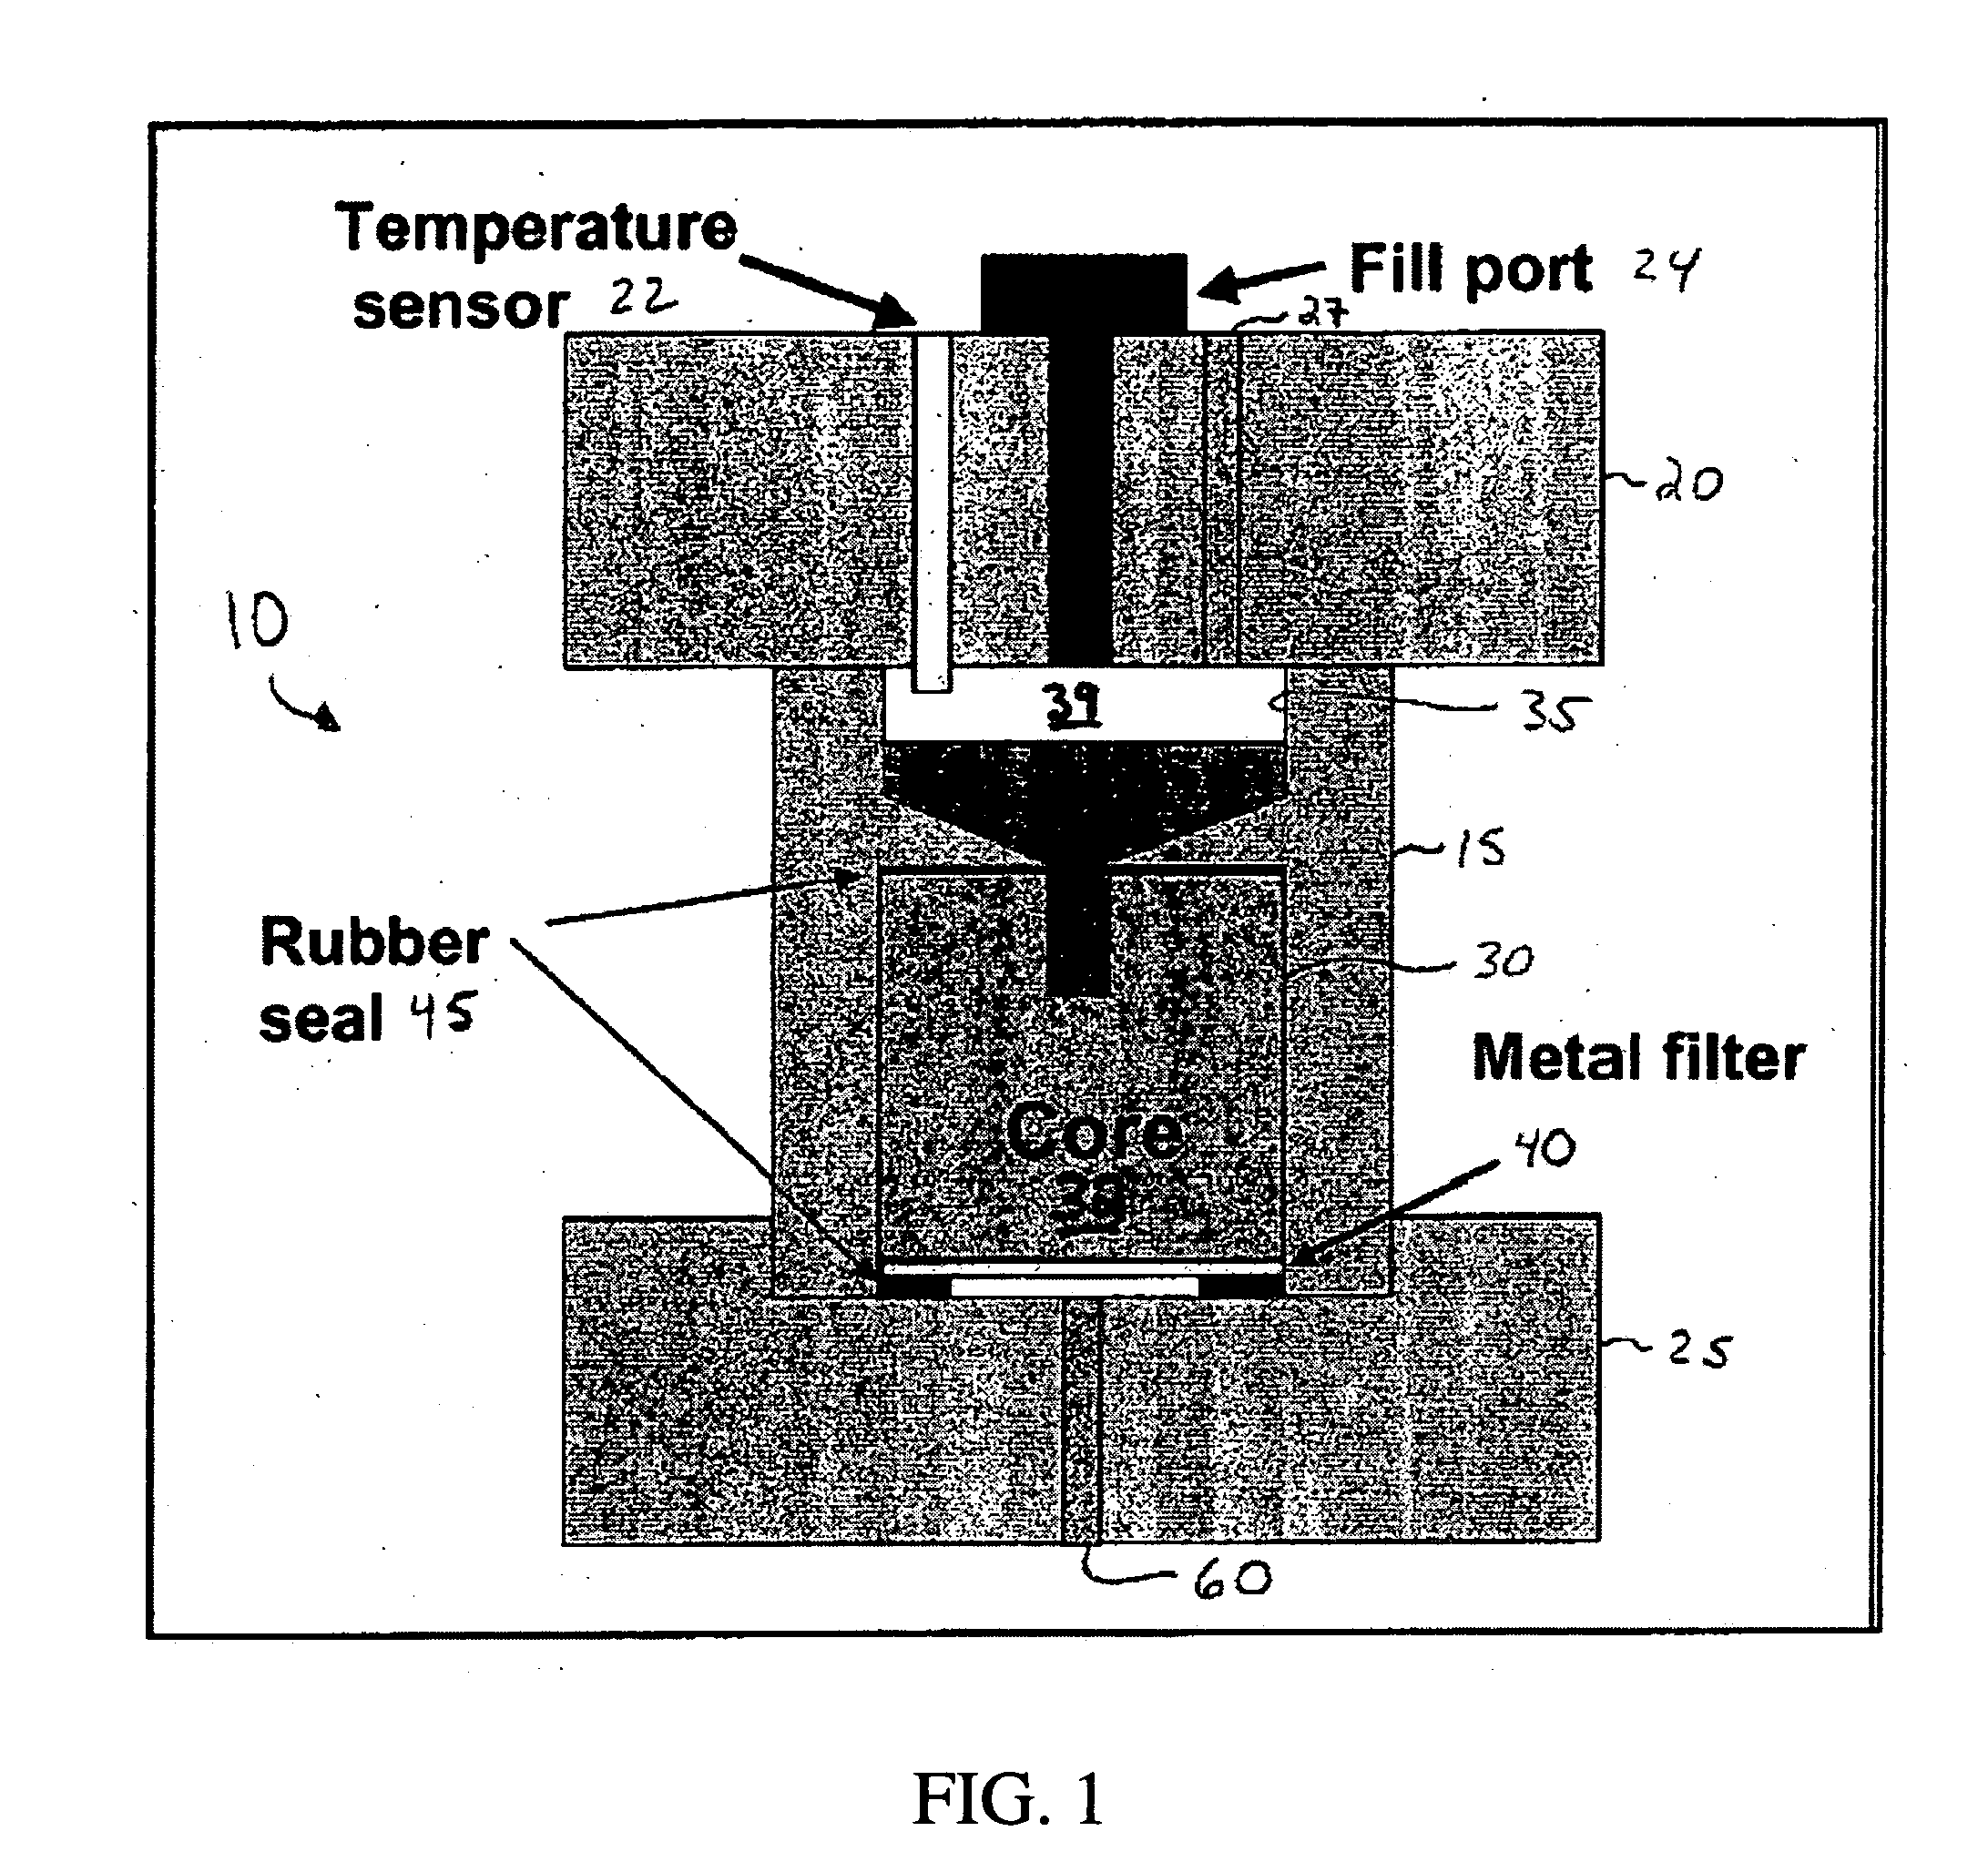 Sealant composition comprising a crosslinkable material and a reduced amount of cement for a permeable zone downhole